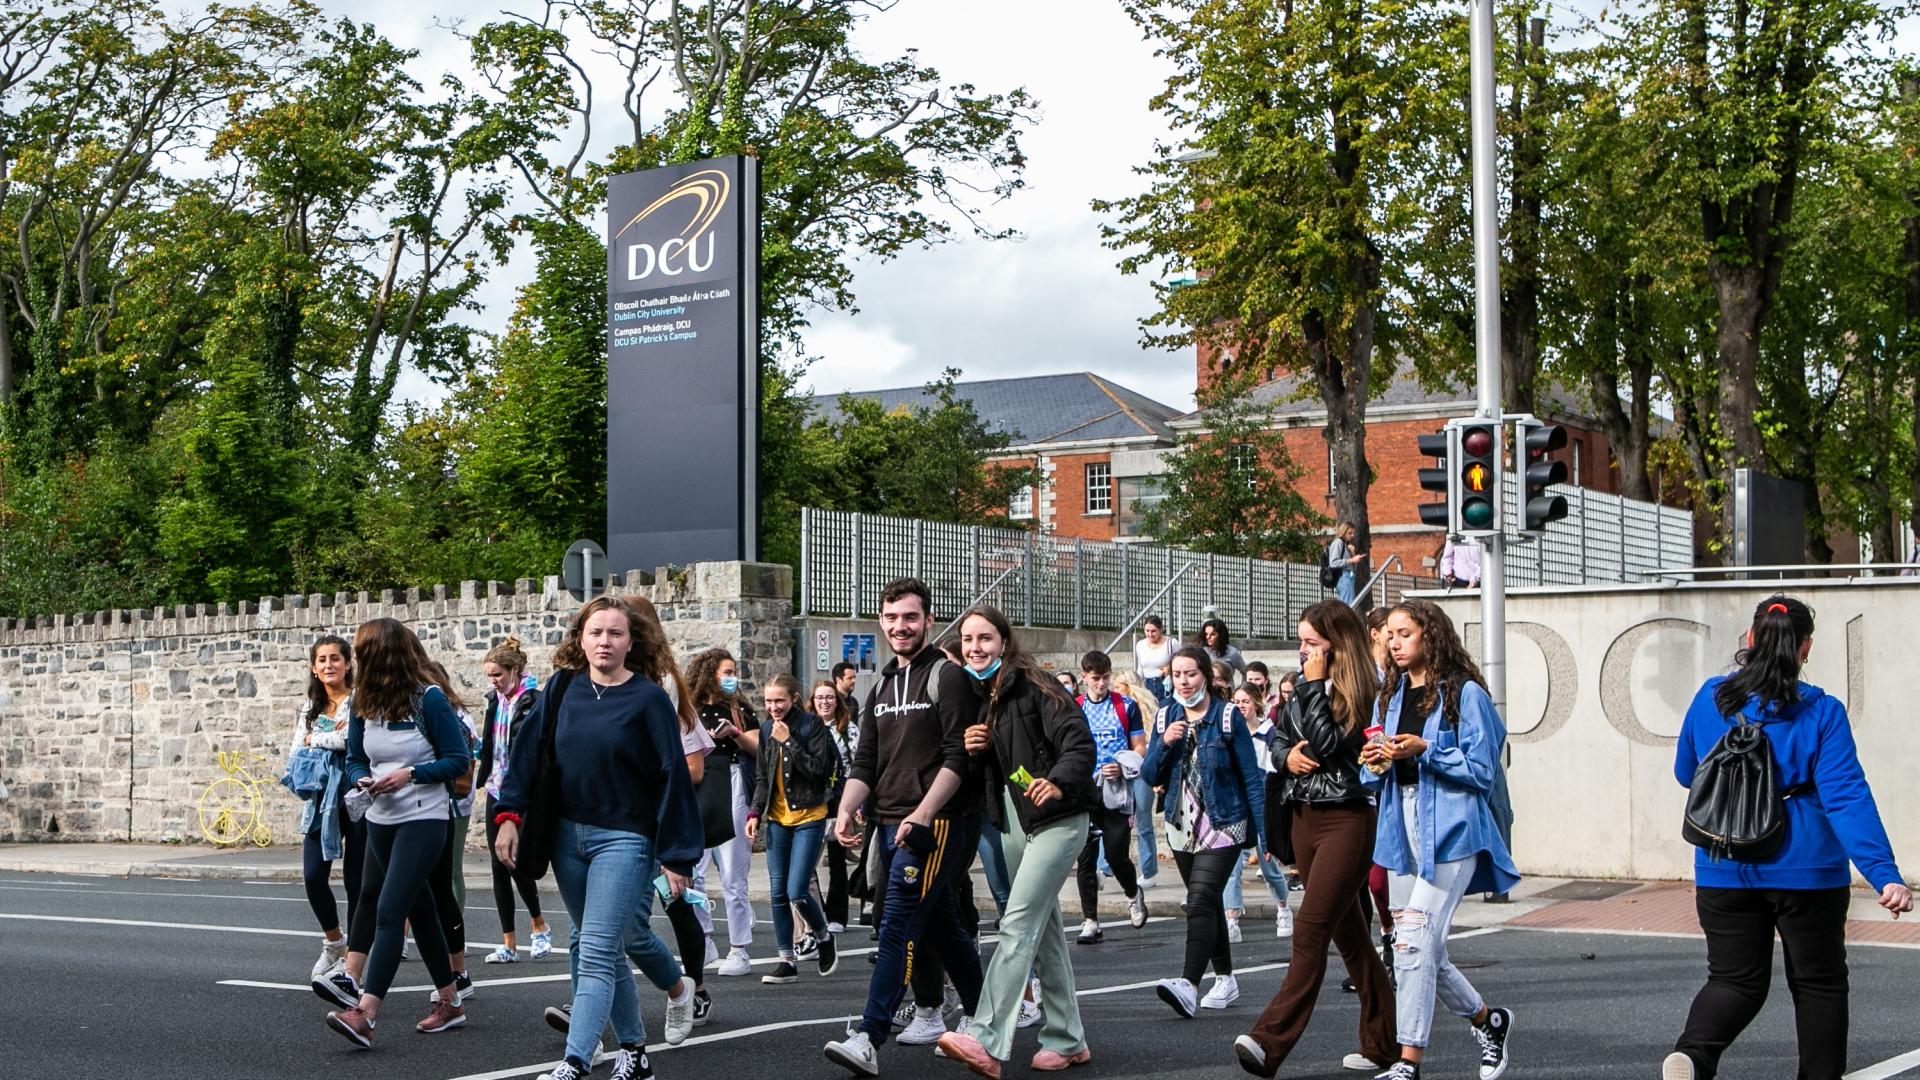 Shows students crossing road outside St Patrick's Campus in Drumcondra